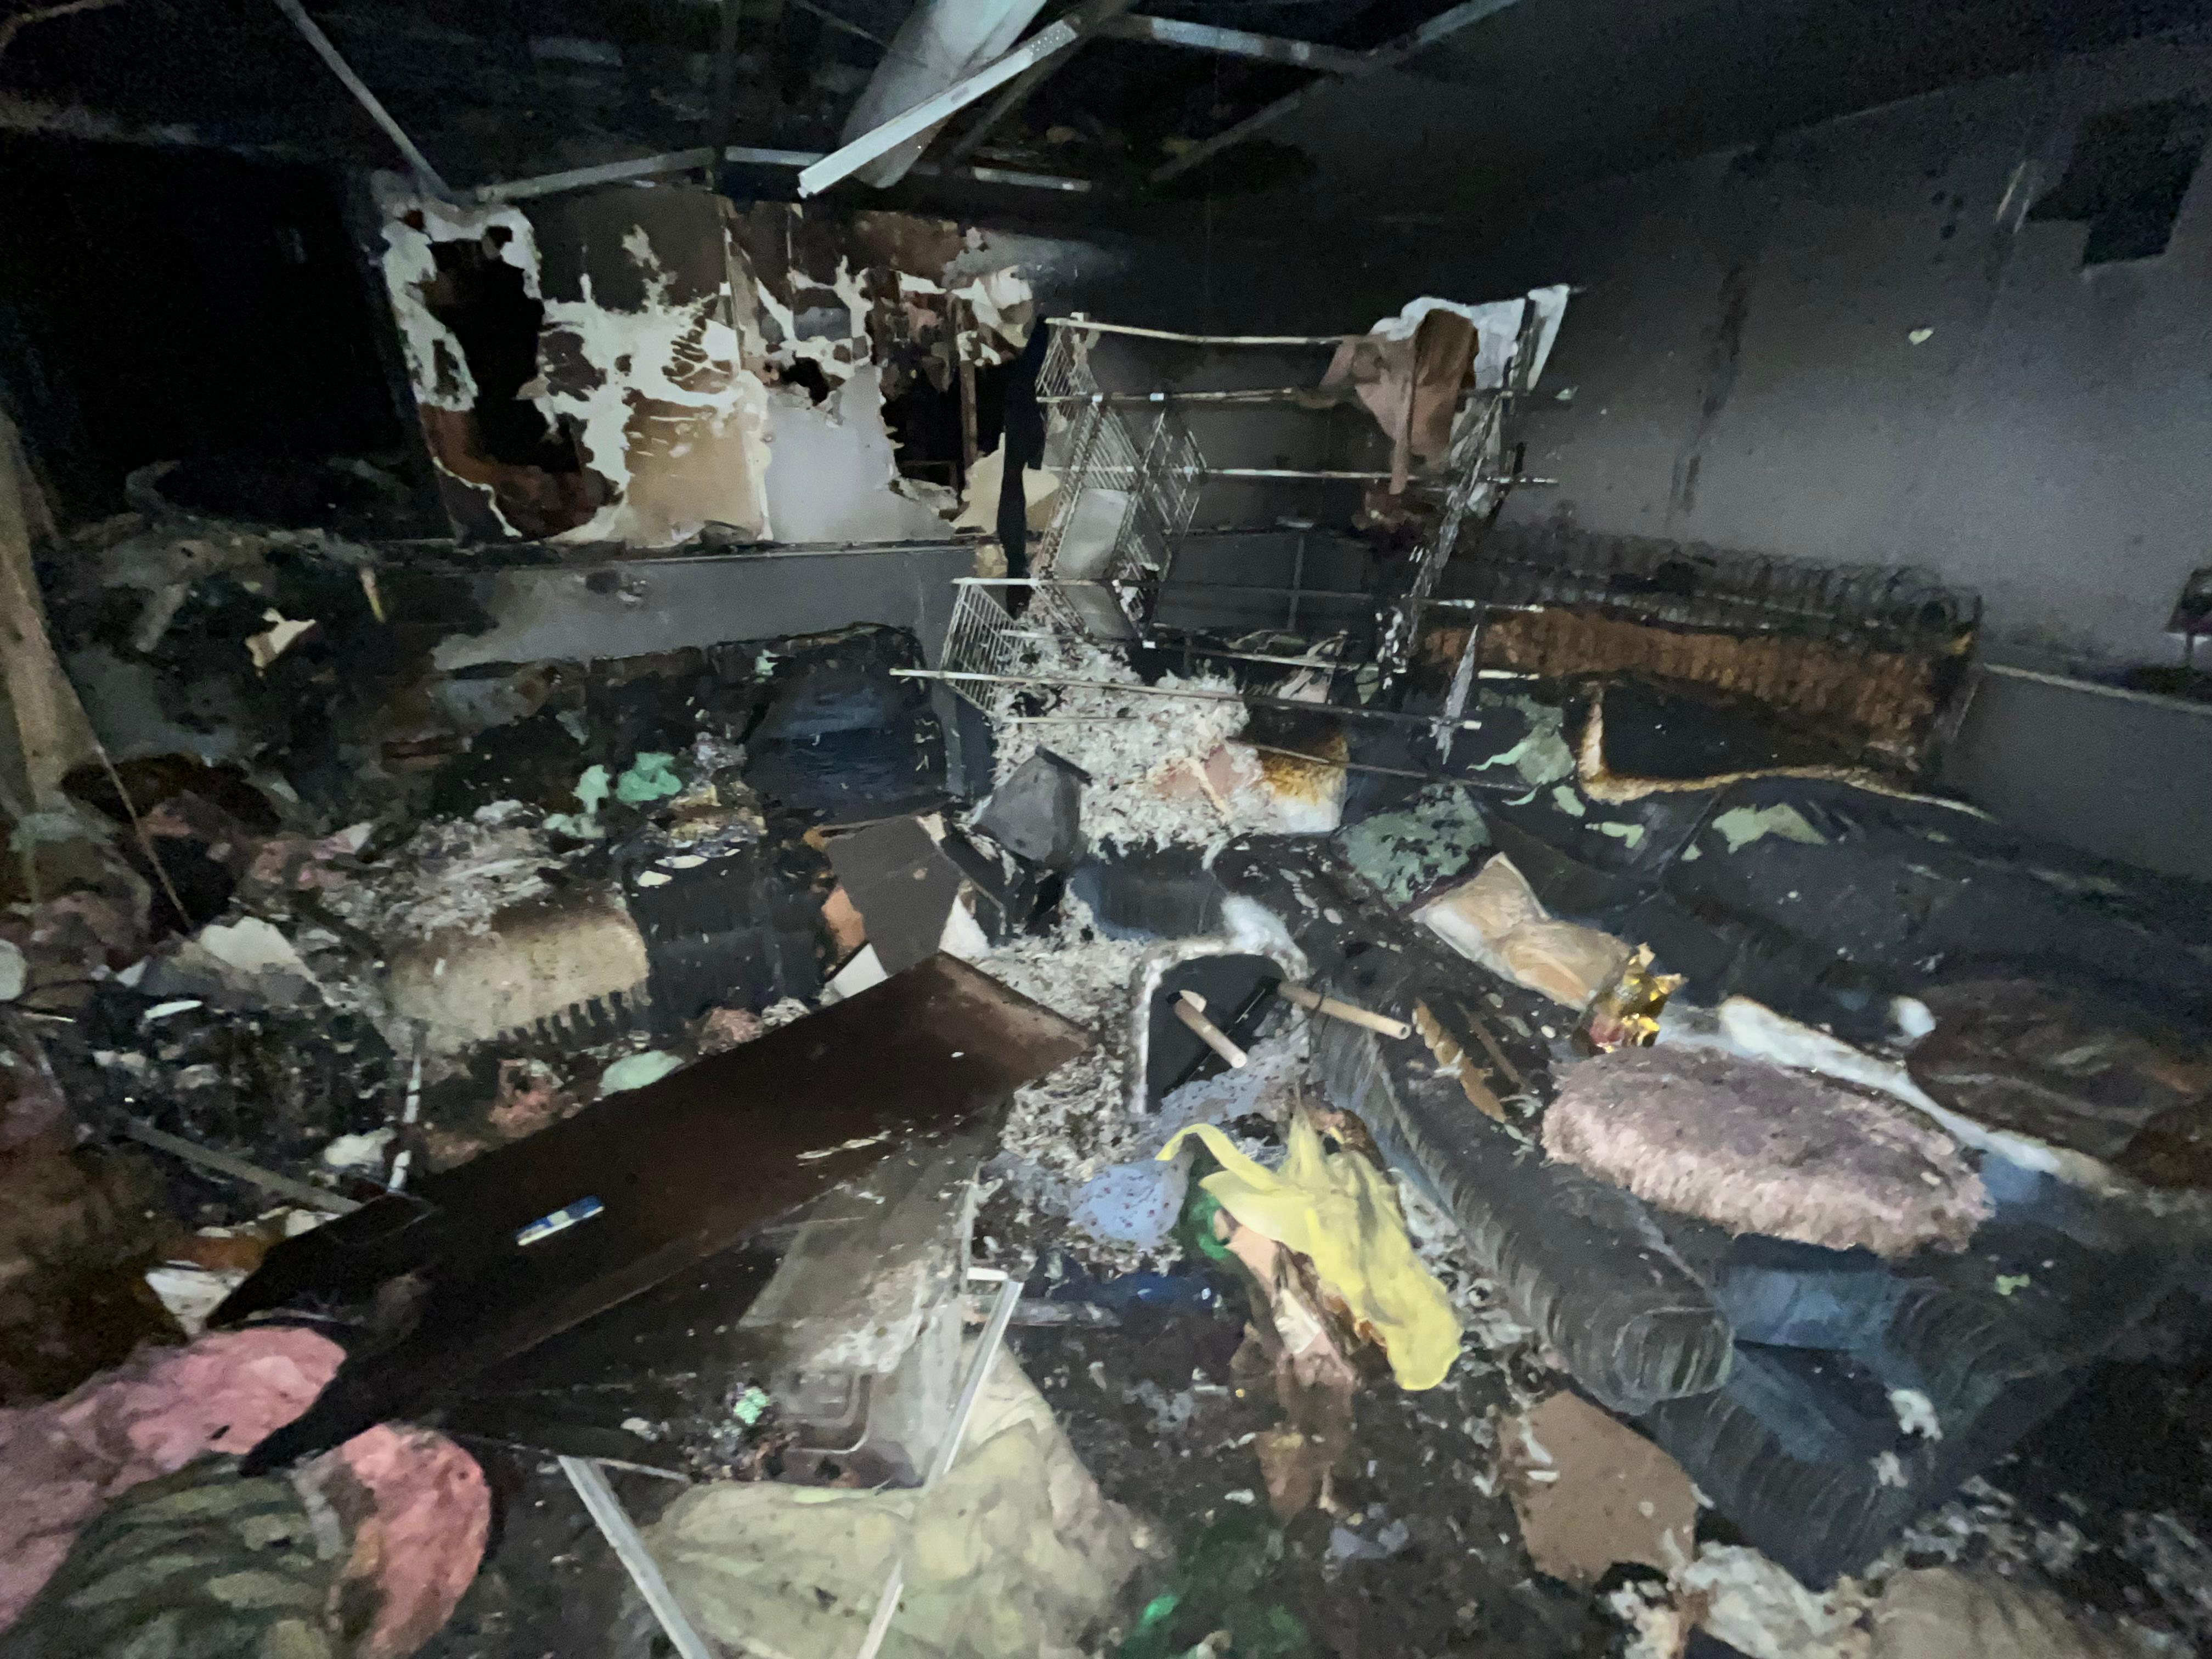 Fire Damage Restoration Services: At SERVPRO of Boston Downtown/Back Bay/South Boston / Dorchester, we understand how devastating a fire can be for homeowners and businesses. Our trained technicians are equipped with the latest equipment and technology to restore your property to pre-fire condition as quickly as possible. Give us a call to schedule services!